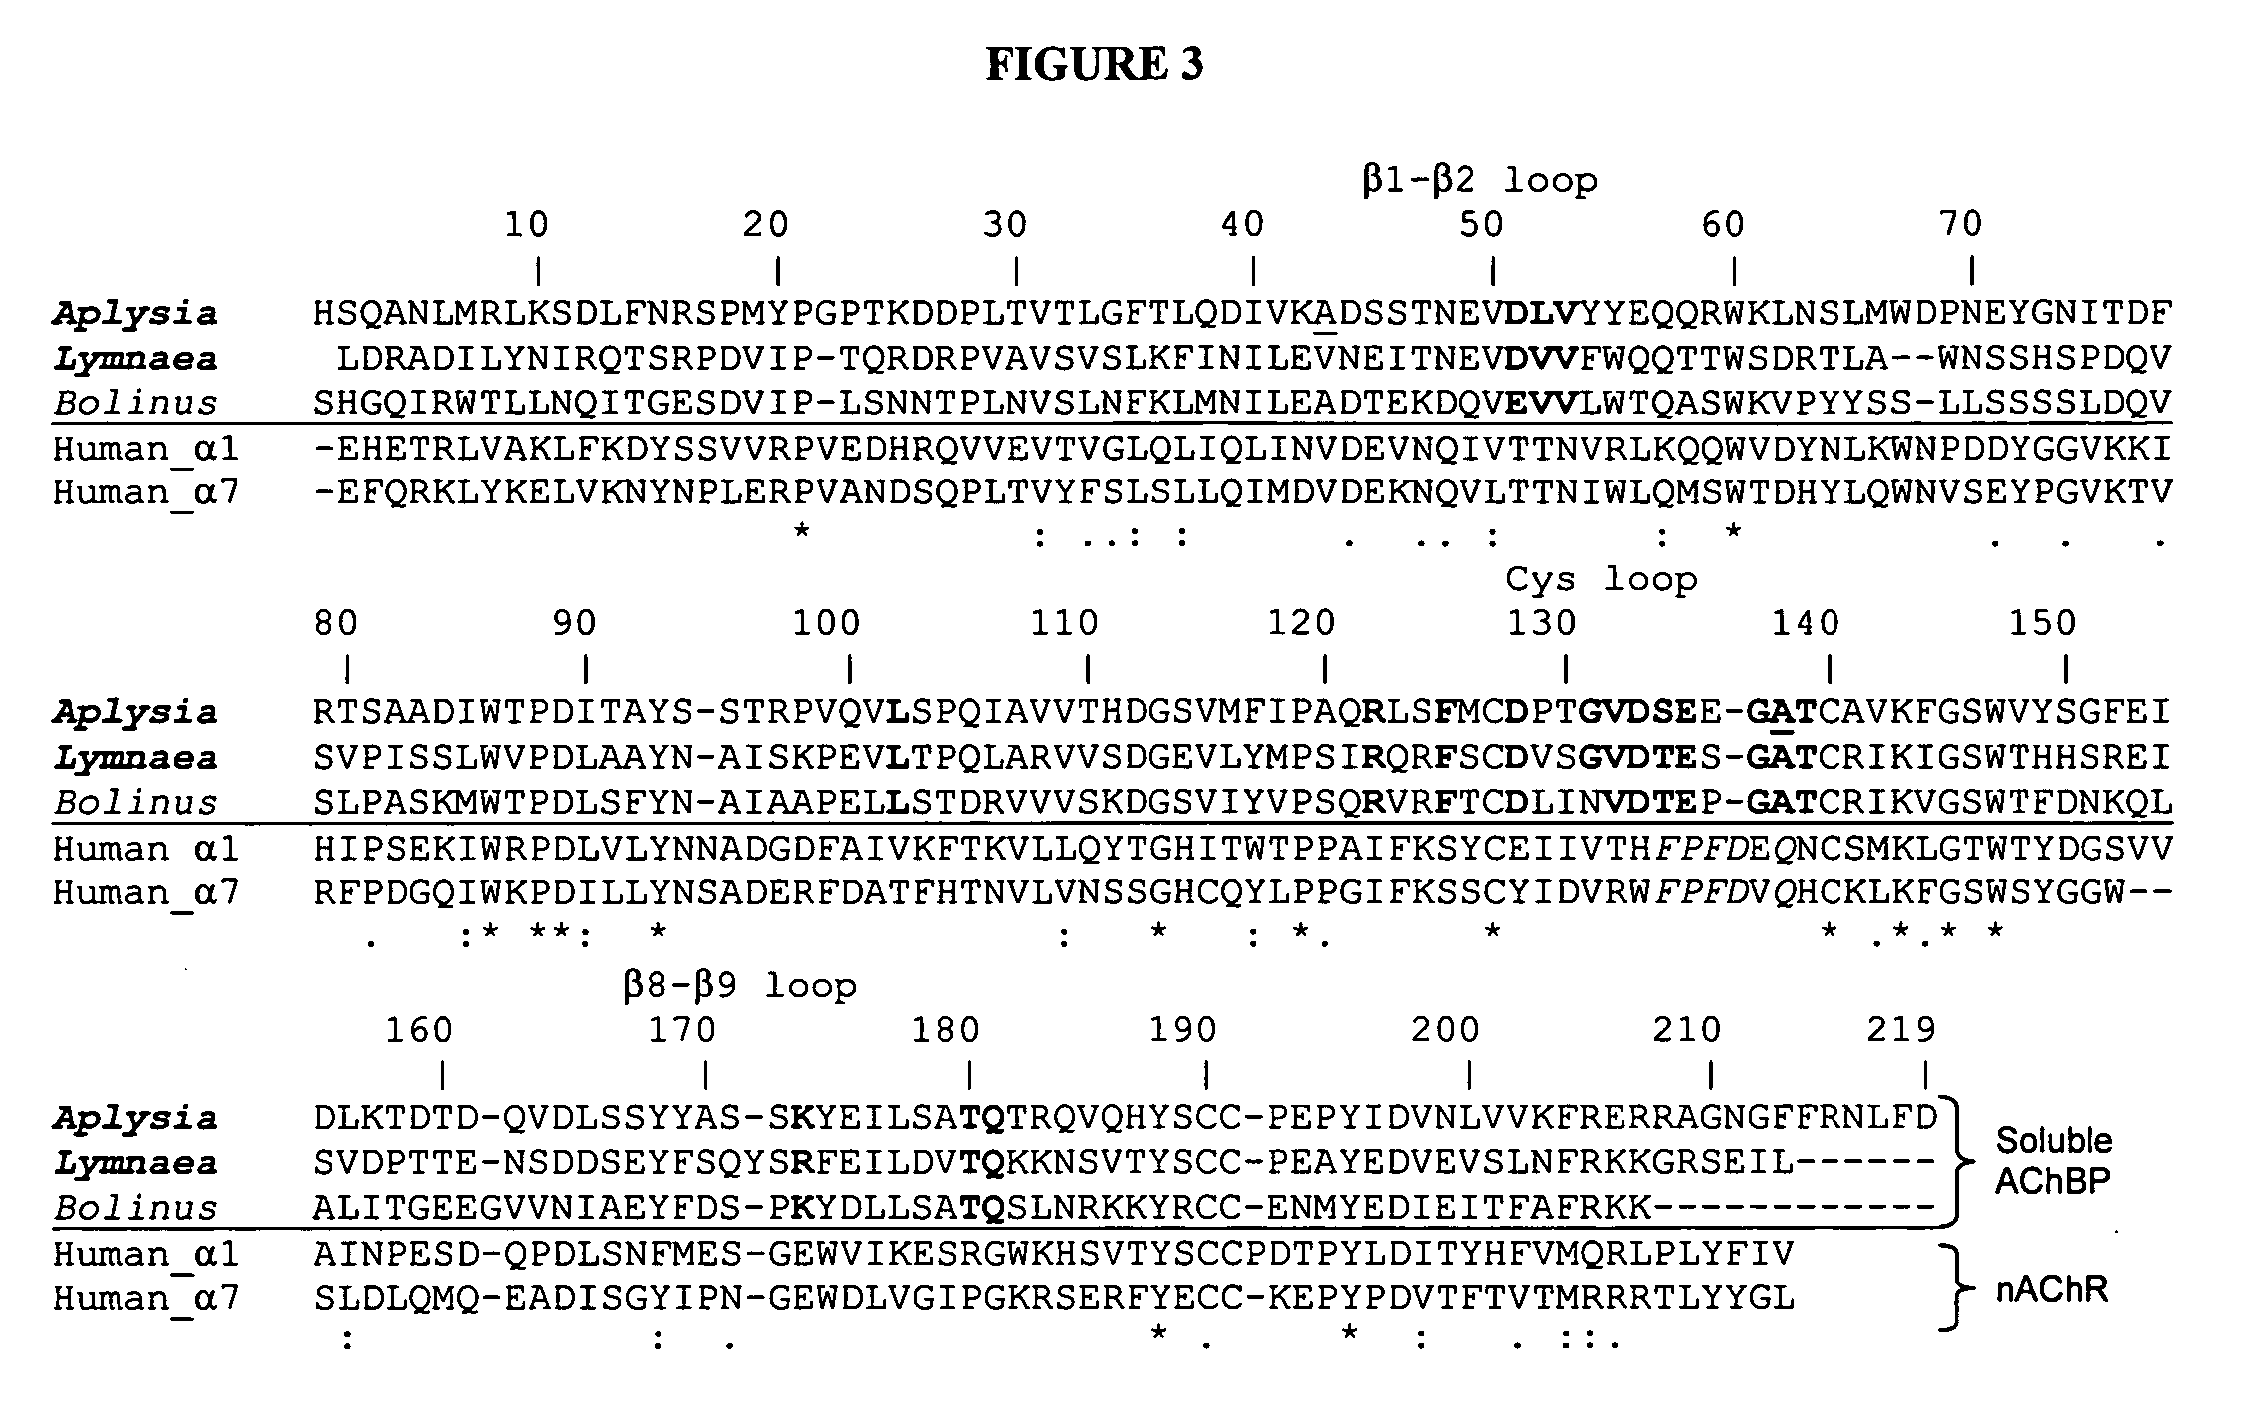 Acetylcholine binding protein, and methods of identifying agents that modulate acetylcholine receptor activity